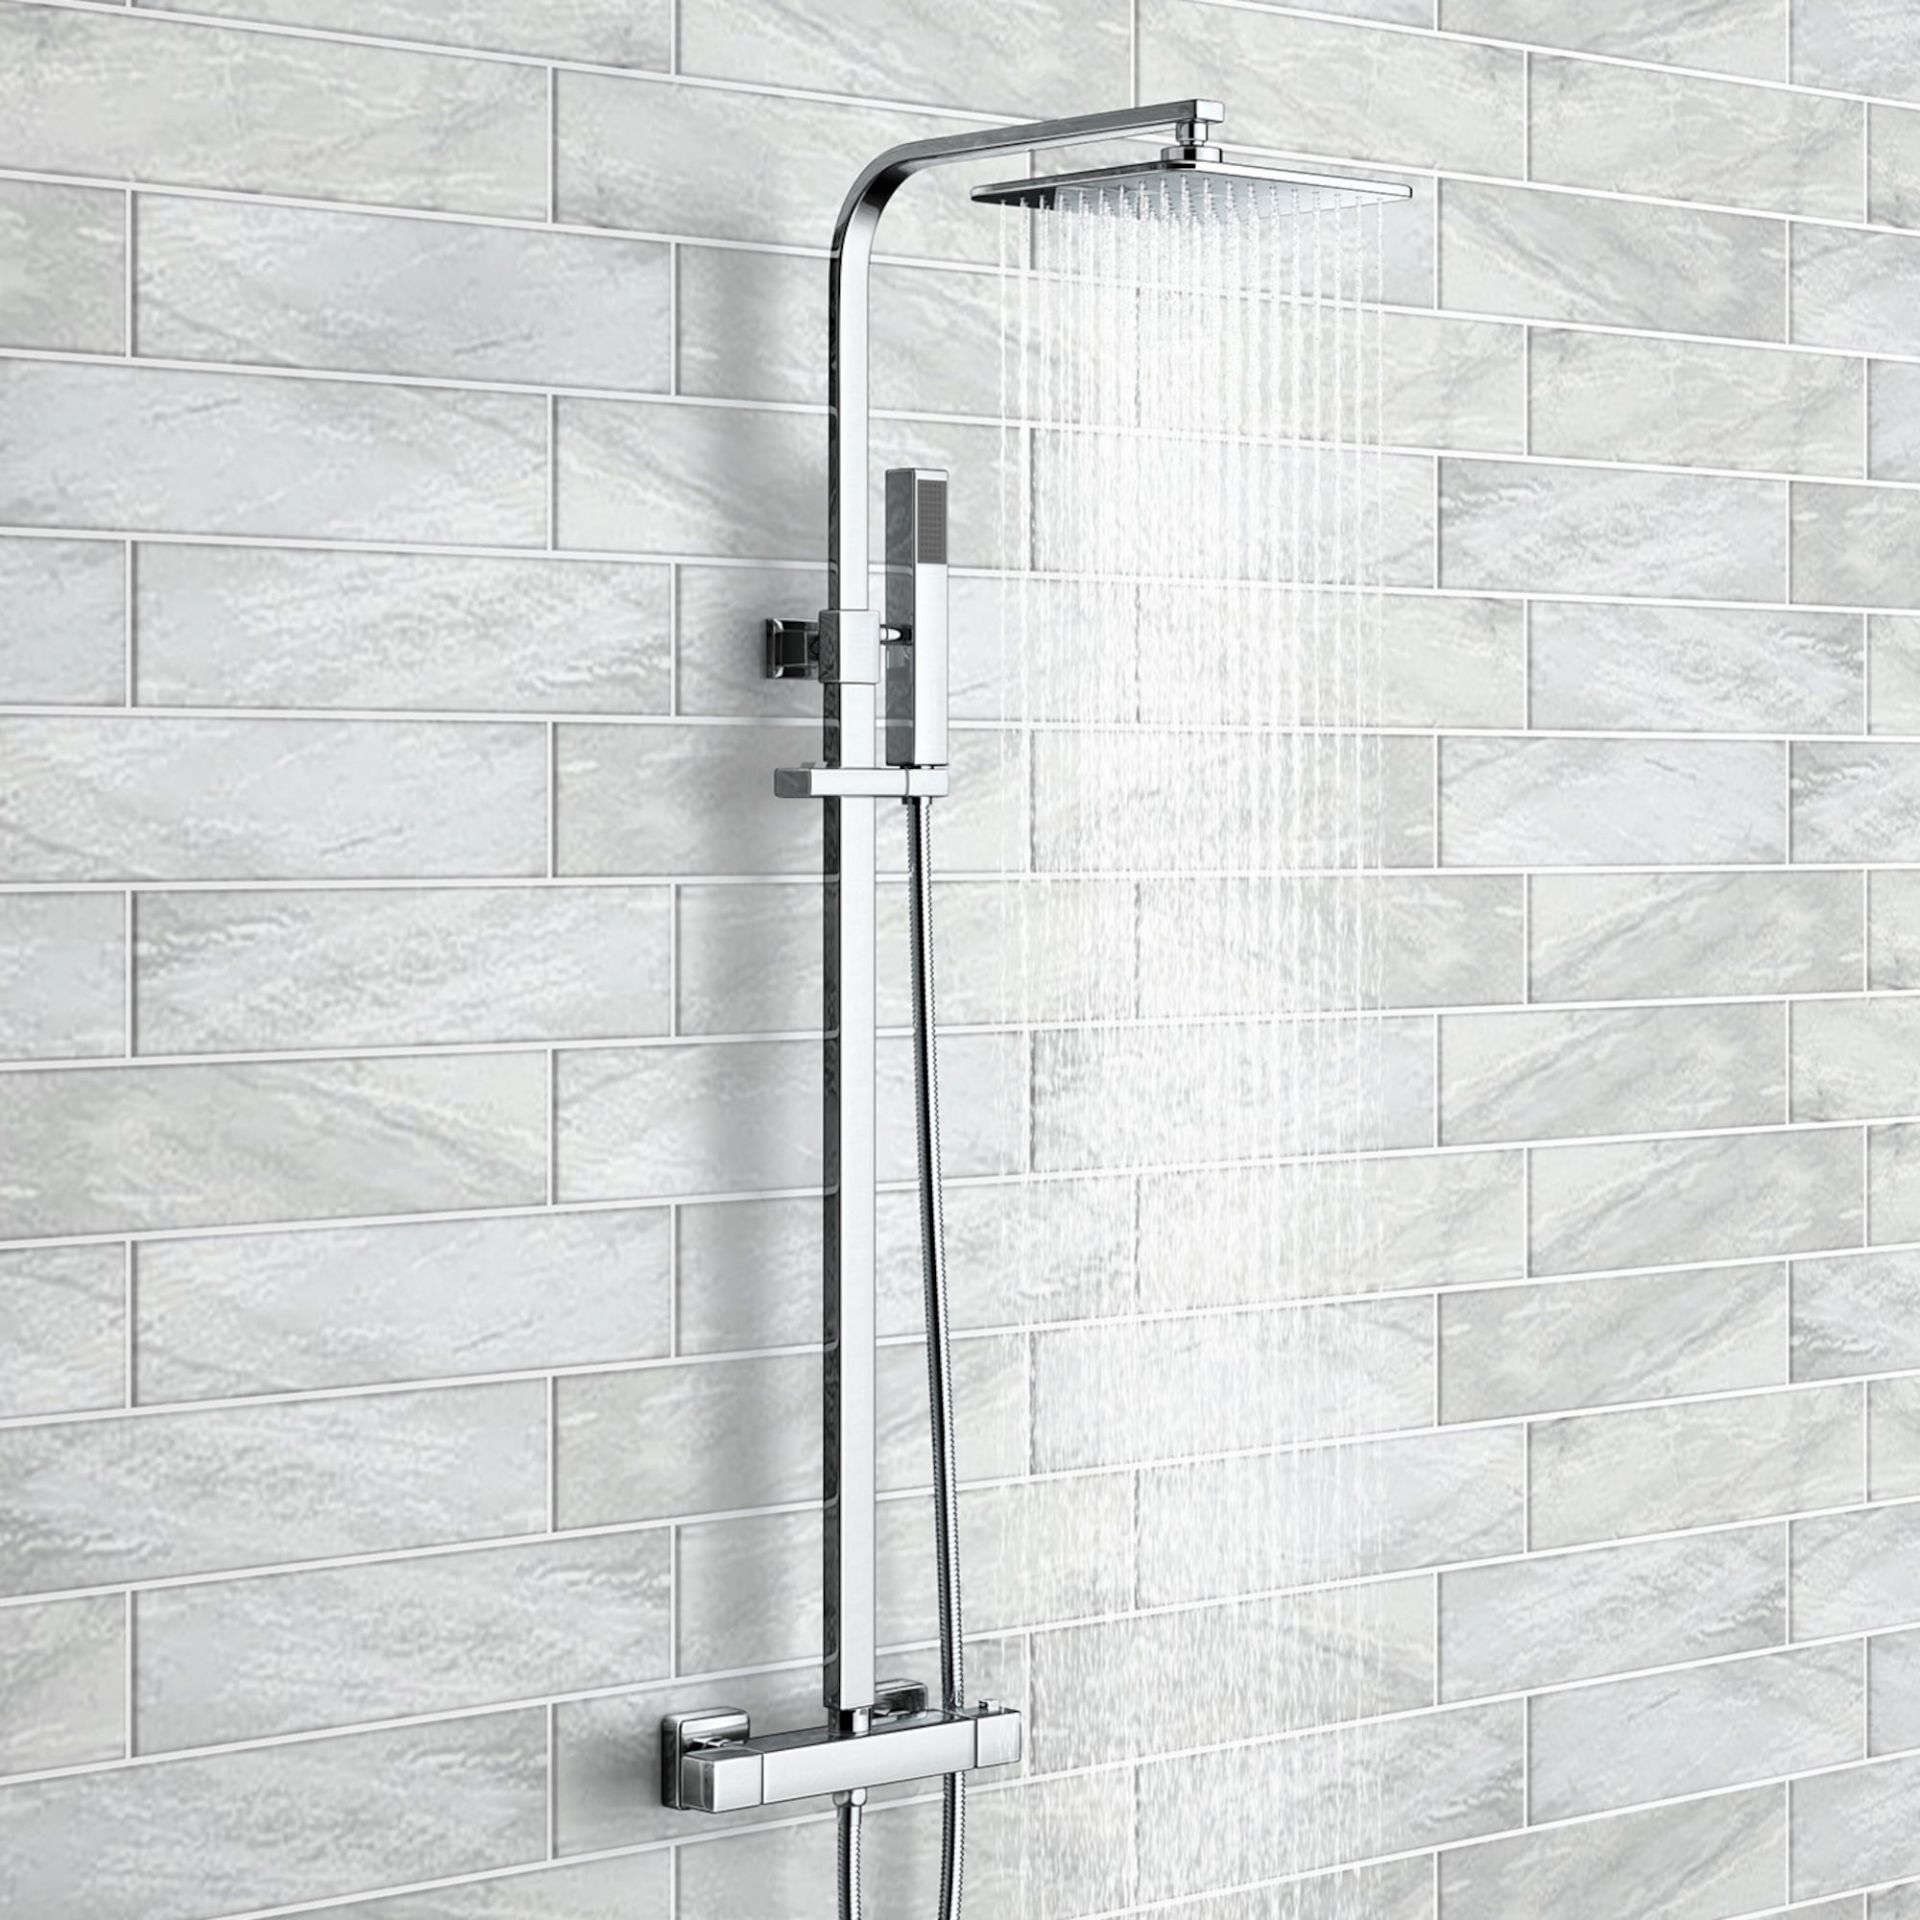 (UK261) Square Exposed Thermostatic Shower Kit & Medium Head. Angled slim and on-trend aesthetic